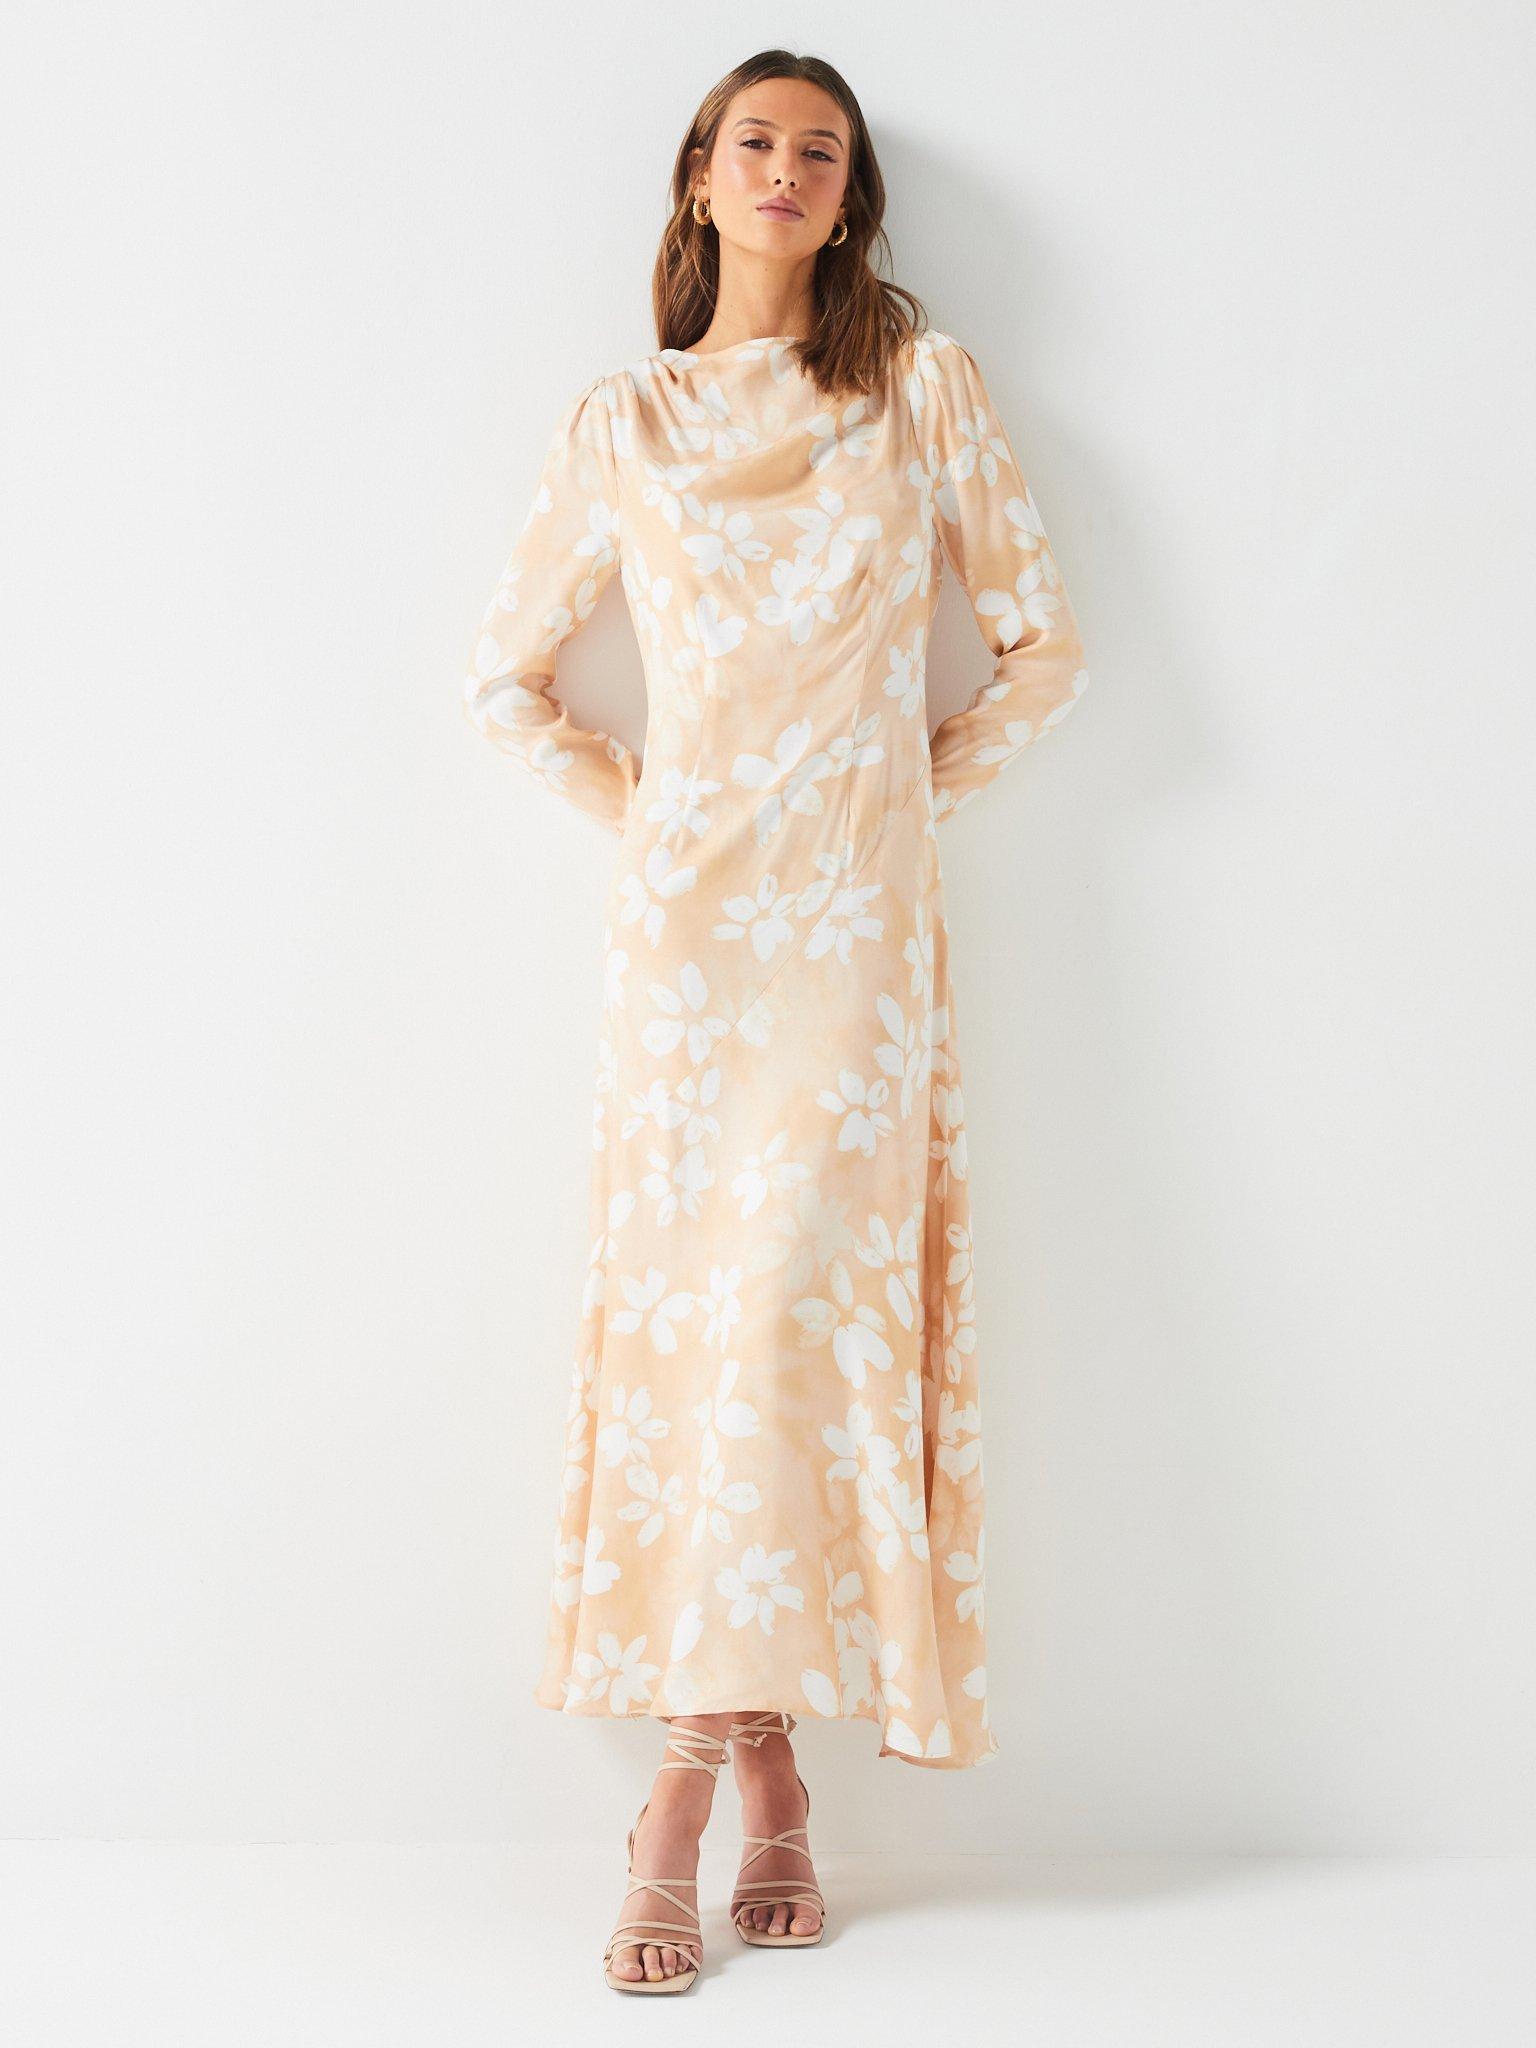 44 Stunning Wedding Guest Dresses & Outfits for 2024 - hitched.co.uk